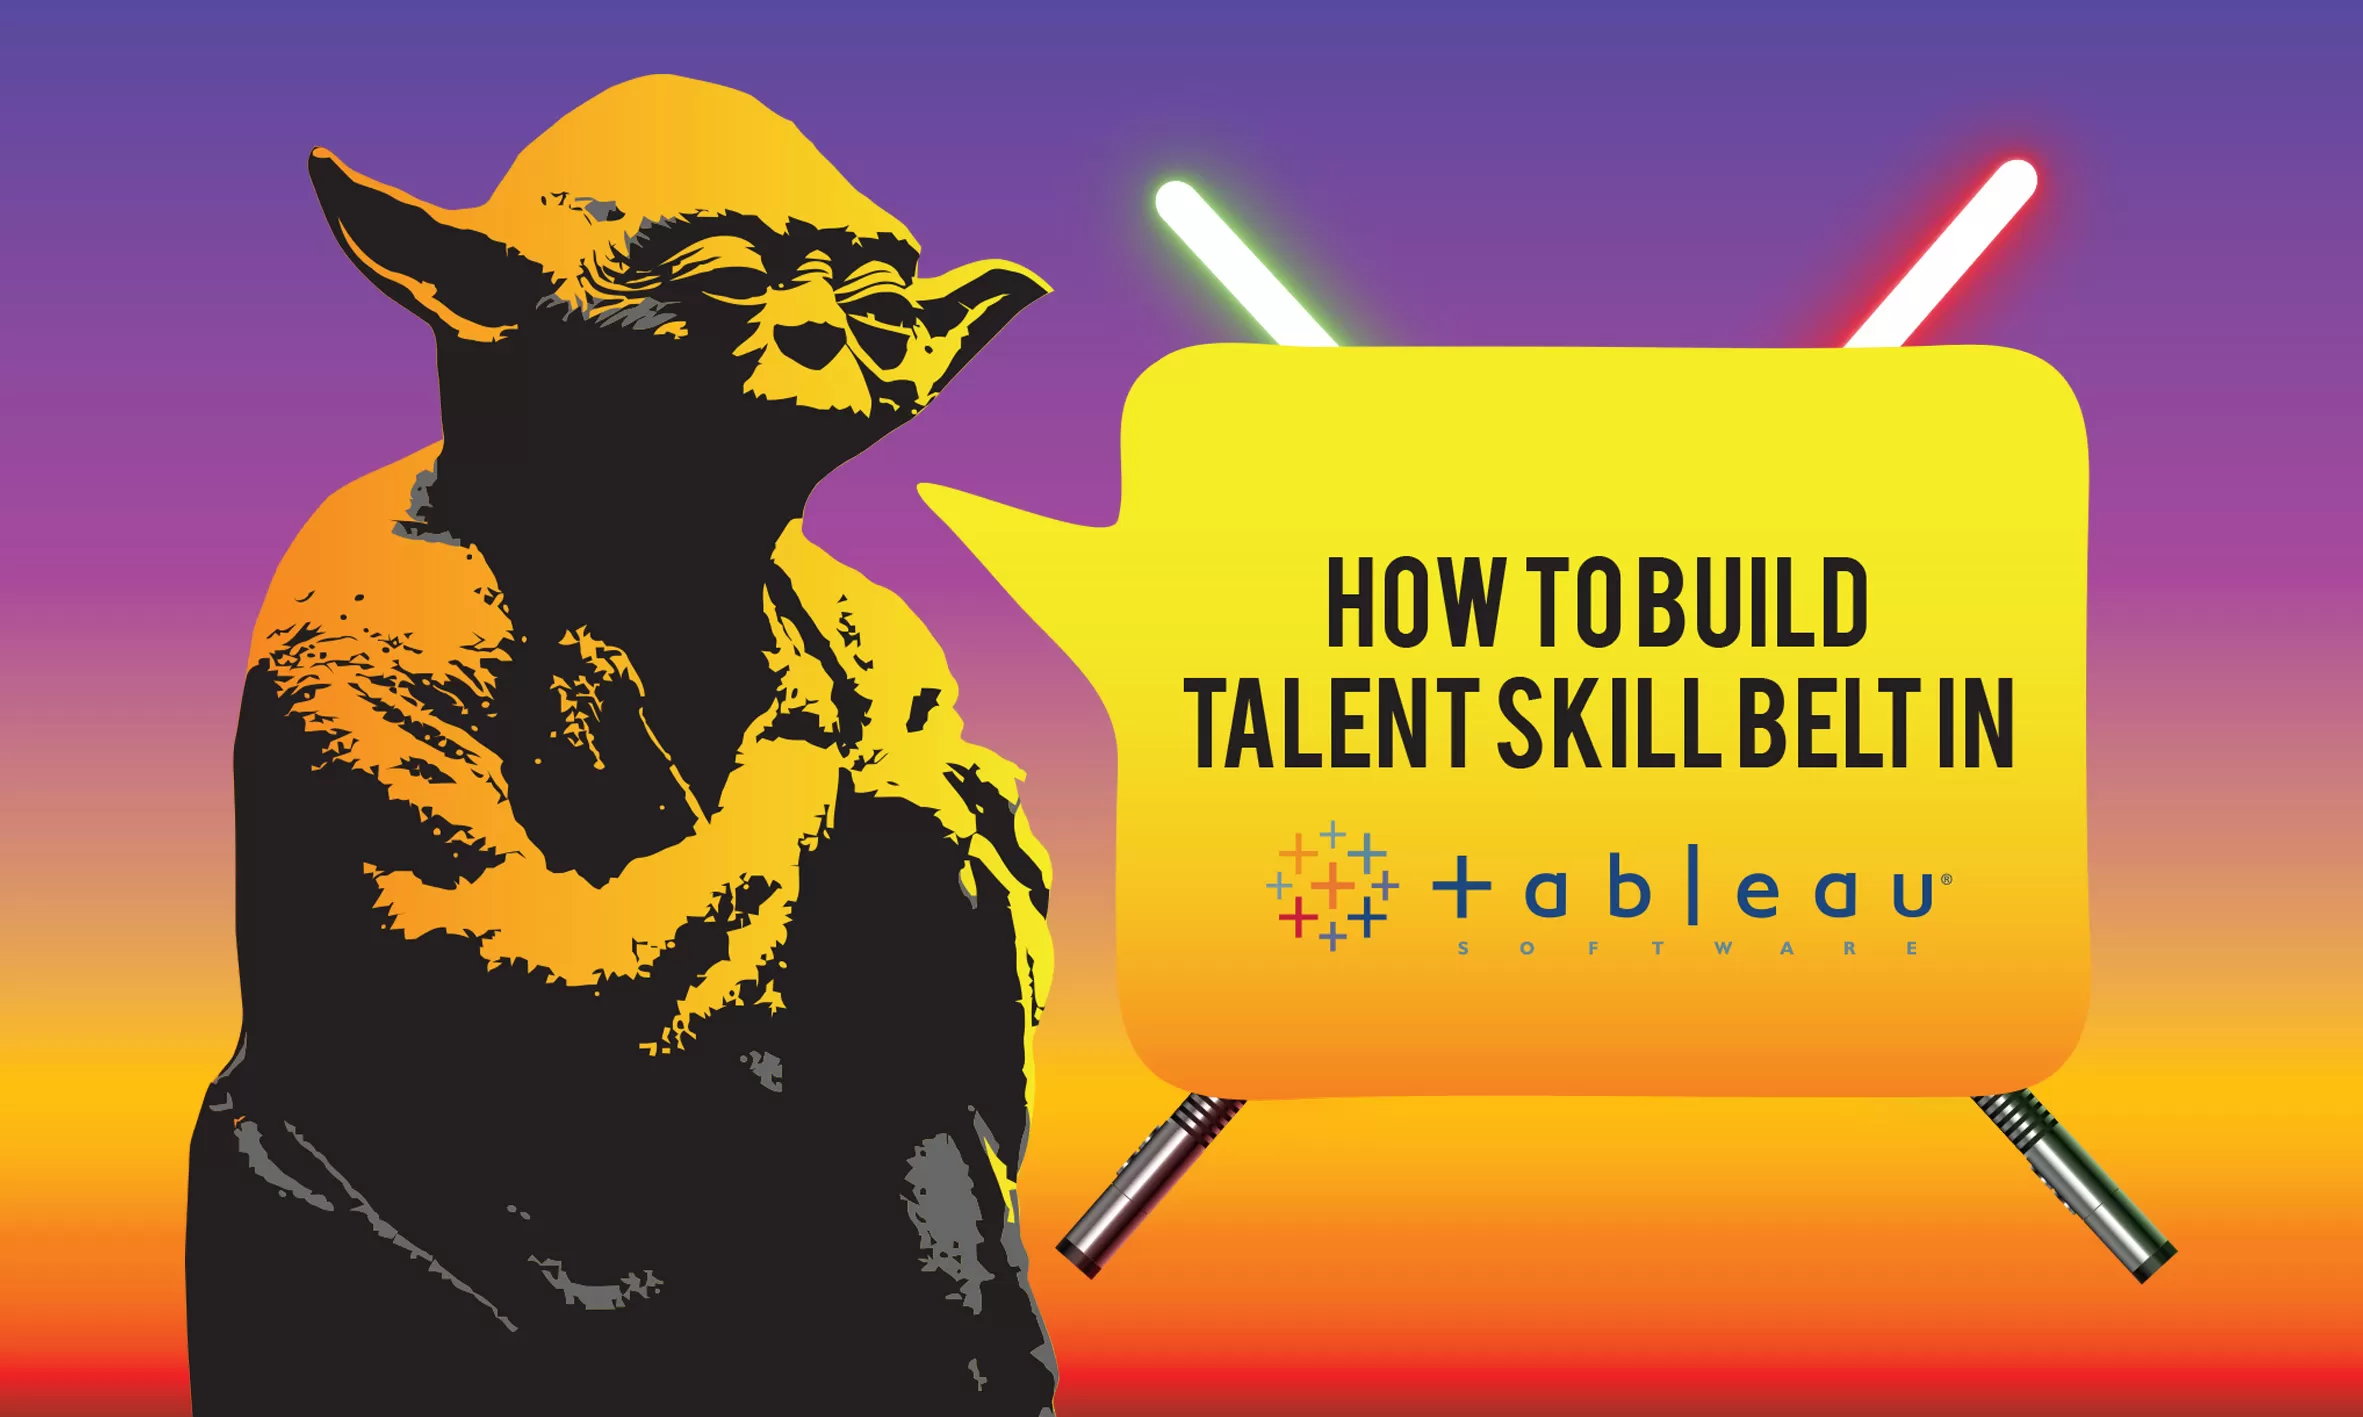 How To Build Talent Skill Belts In Tableau